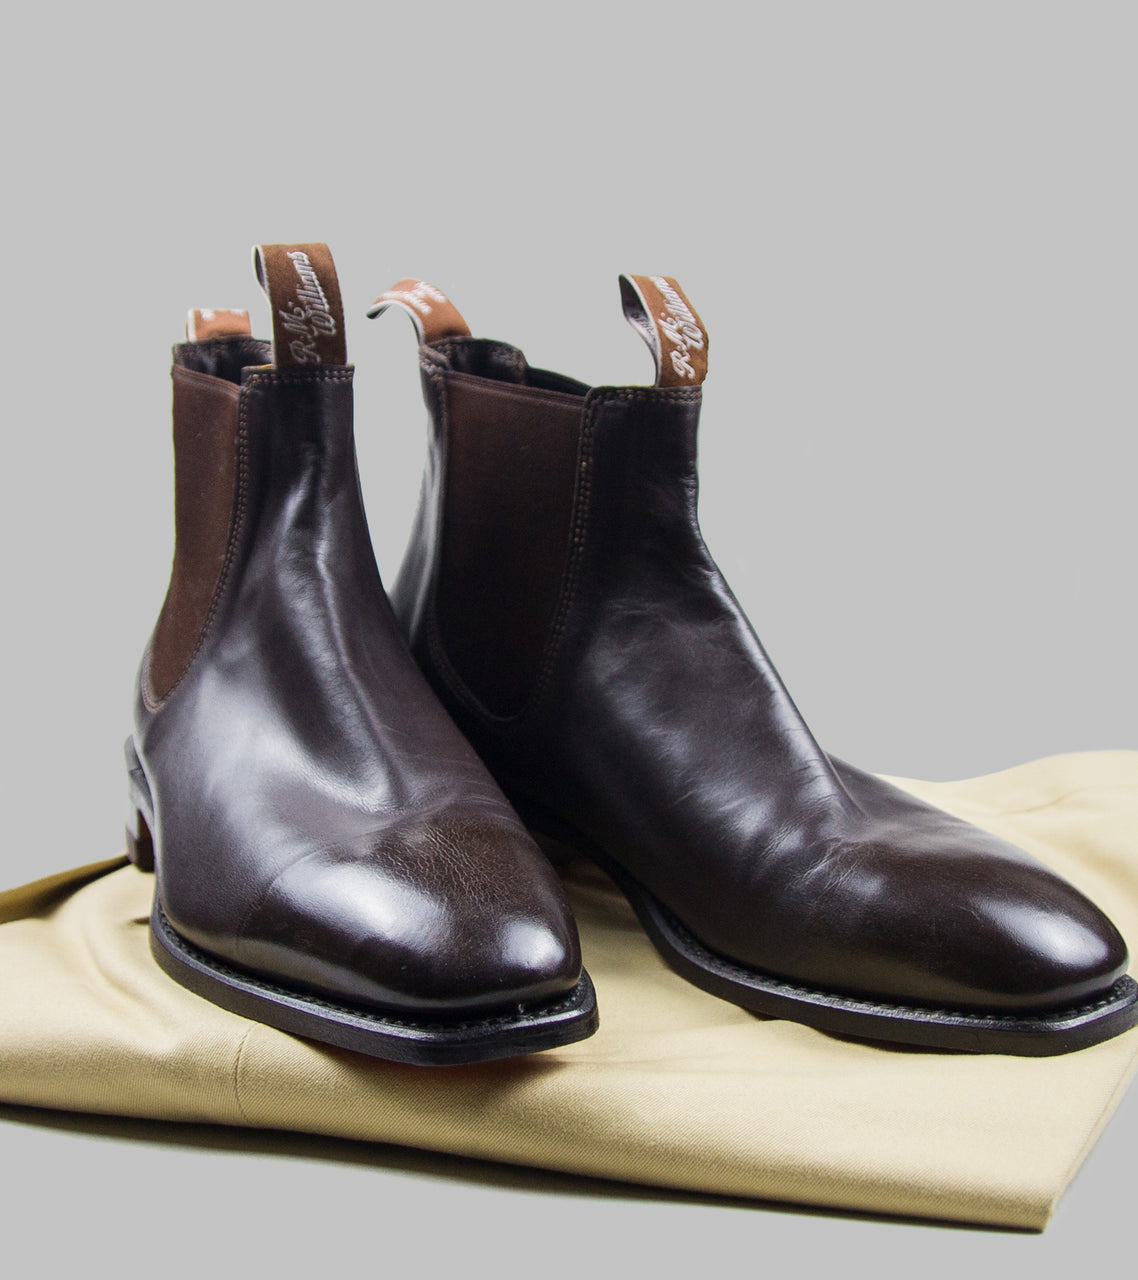 rm williams chelsea boot